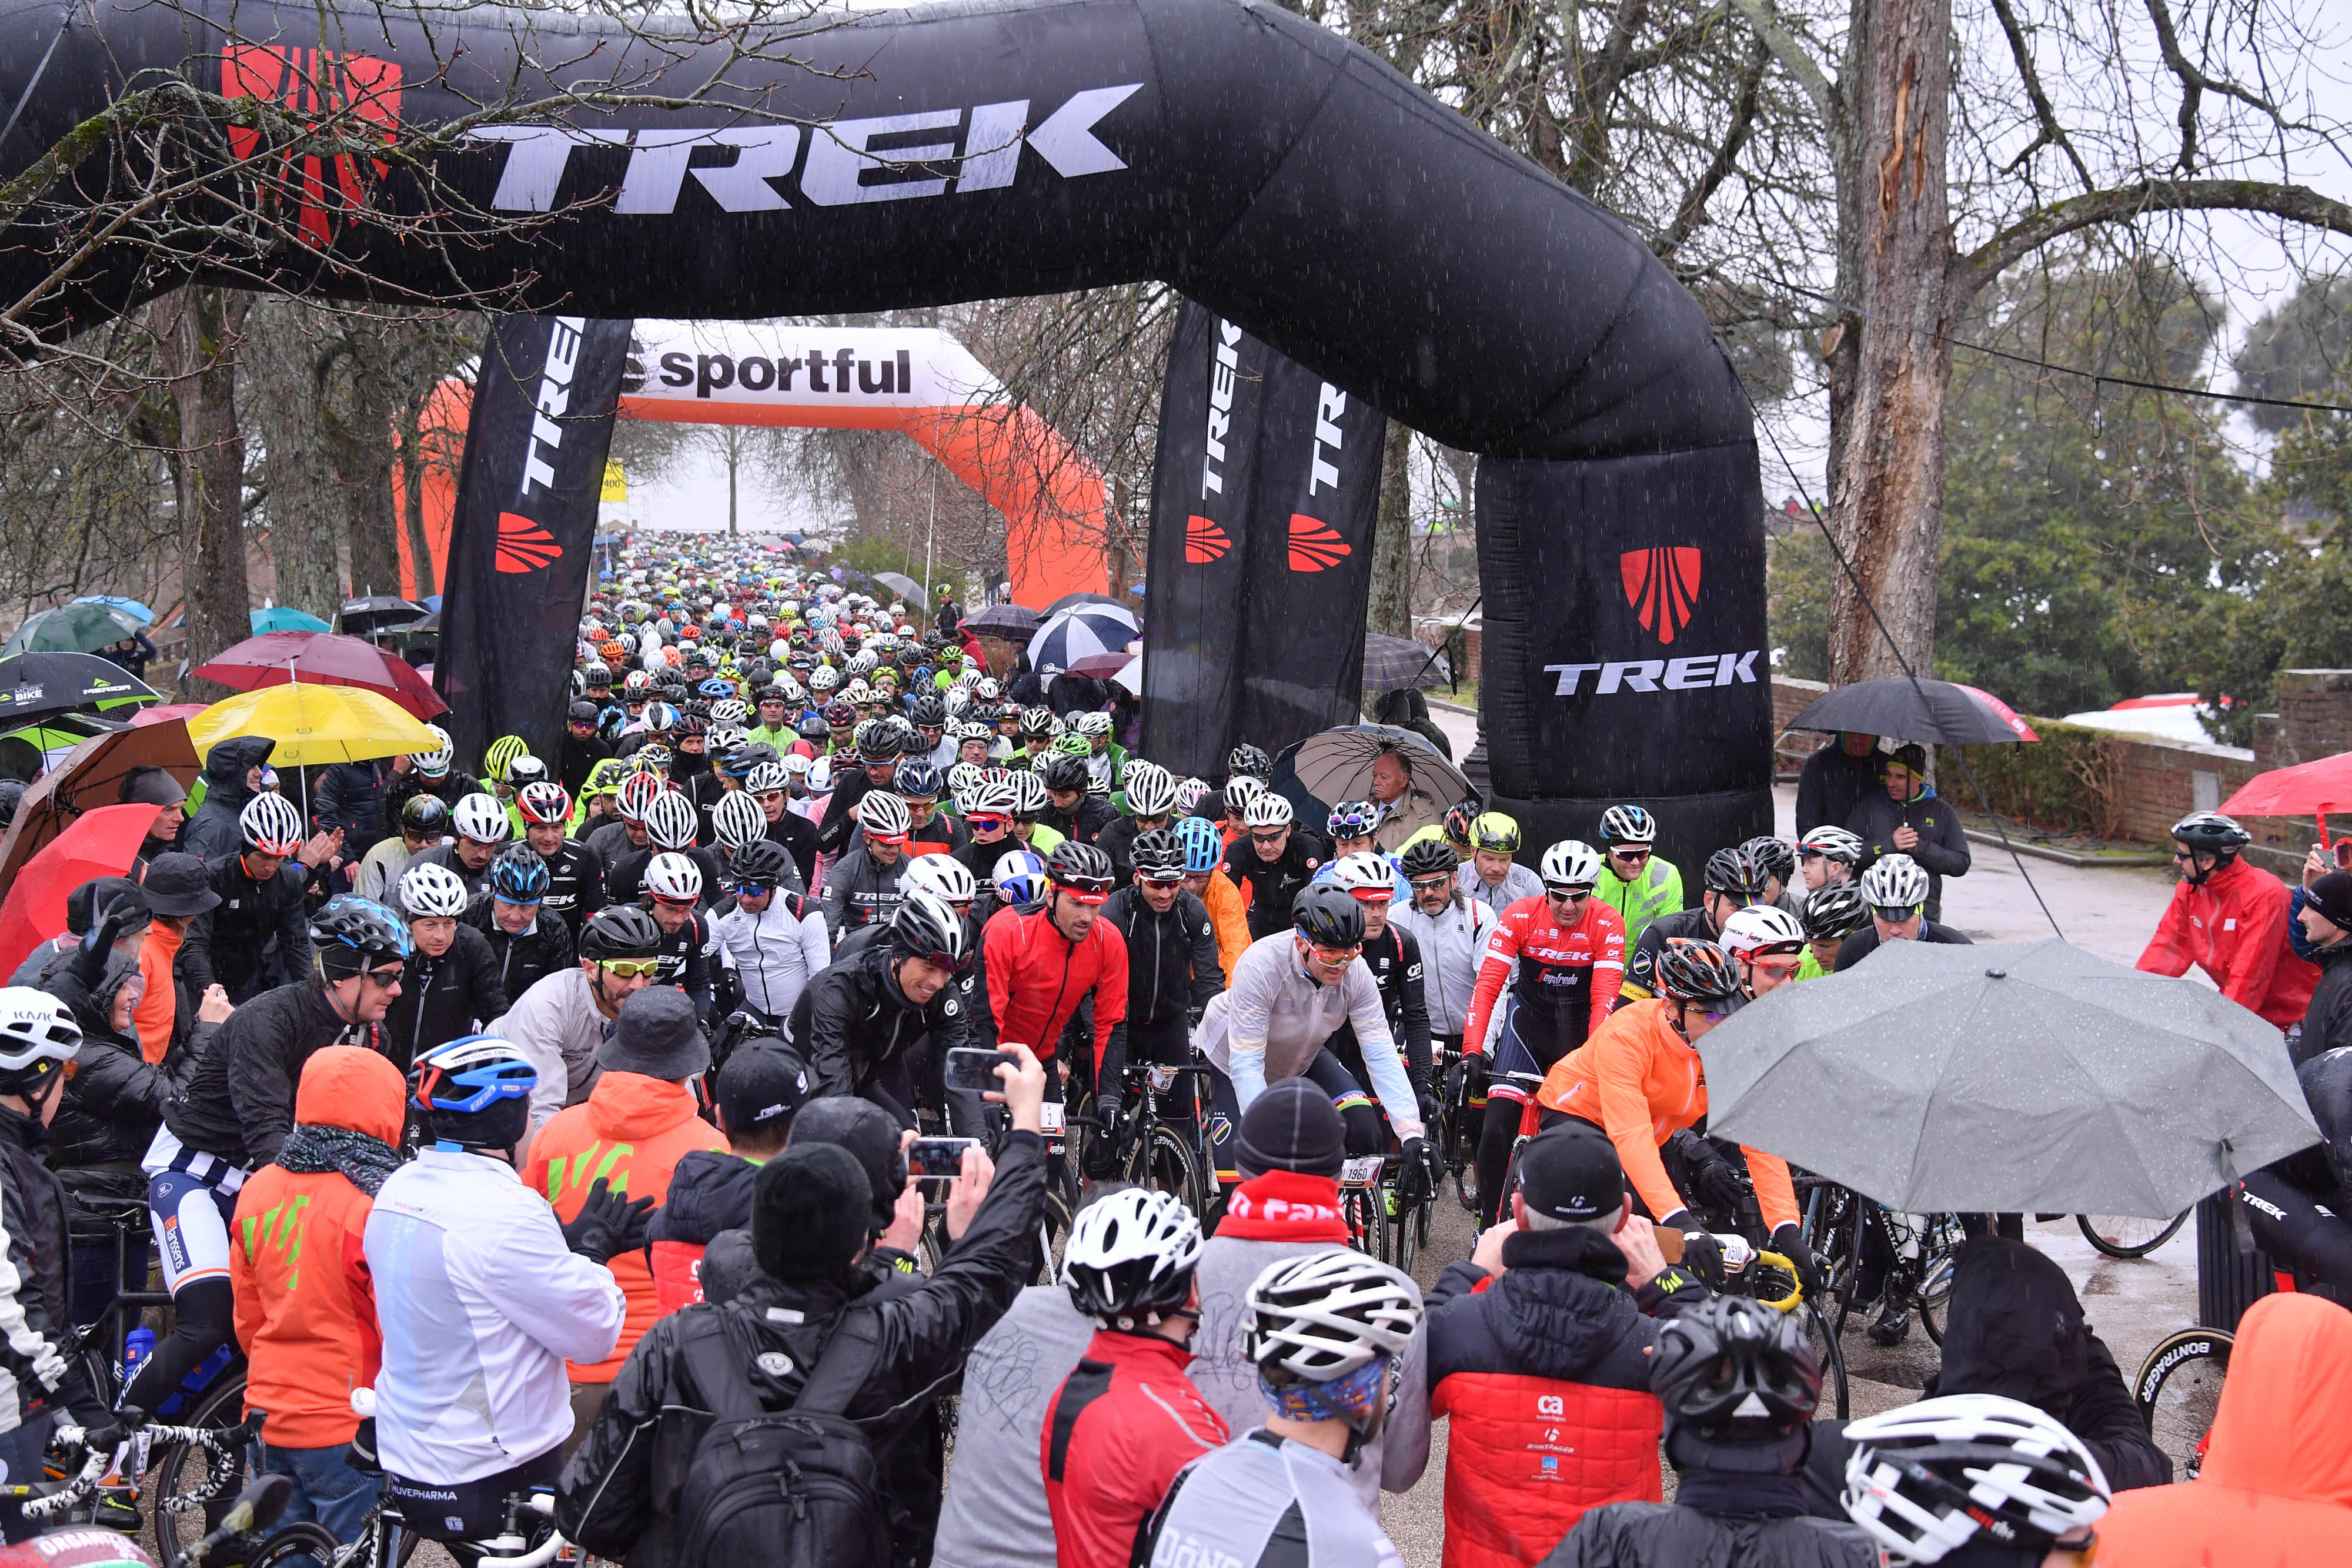 Everyone wants the Gran Fondo: almost 4000 cyclists registered